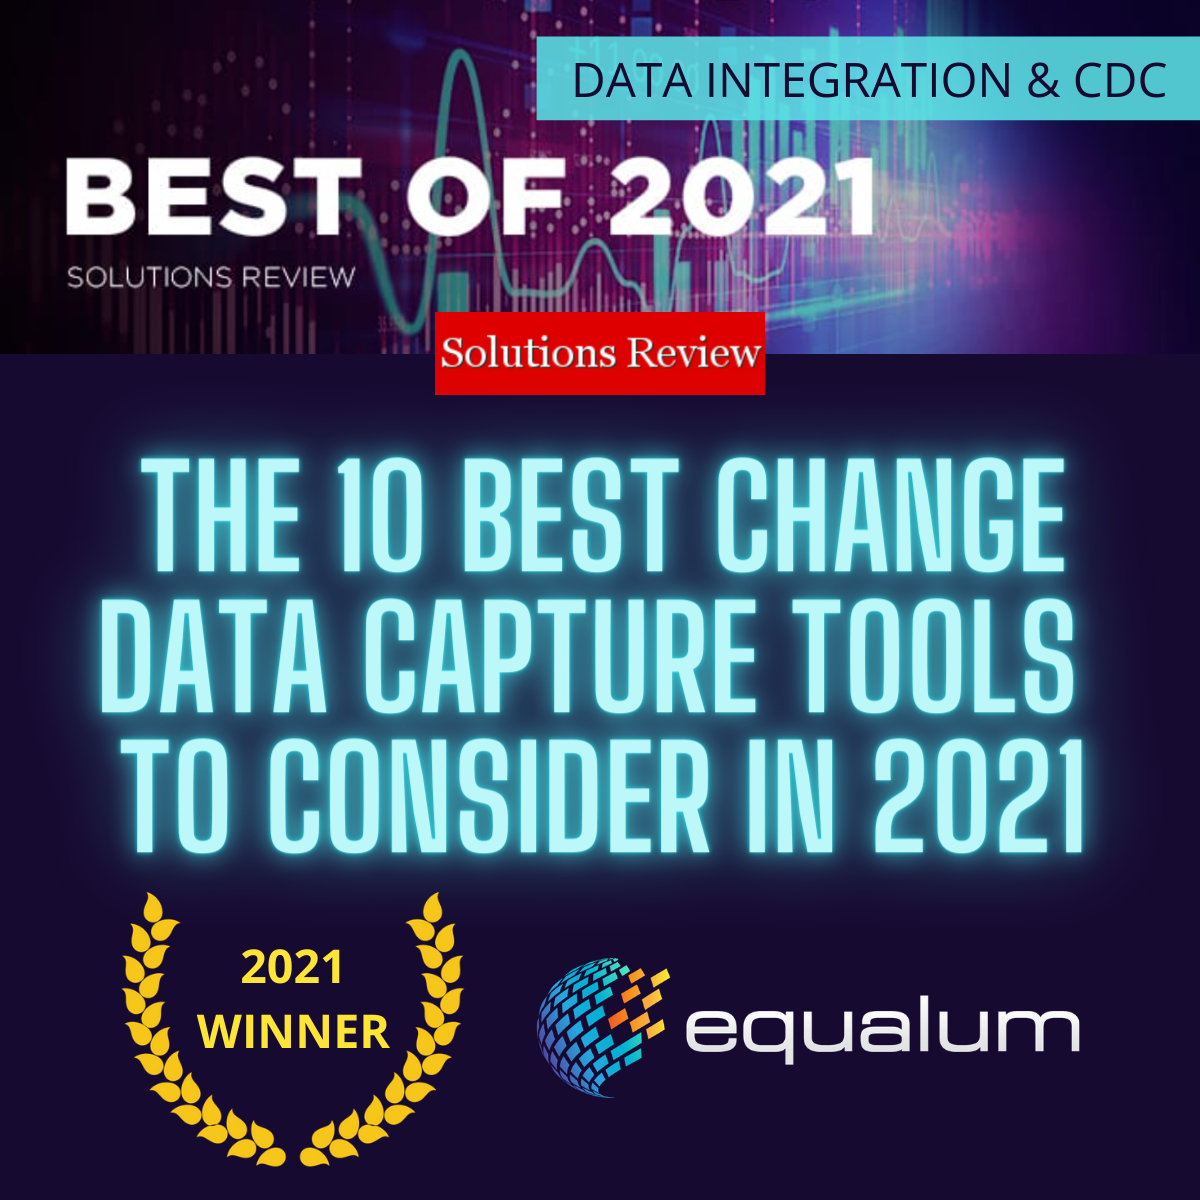 Equalum awarded "10 Best CDC Tools of 2021" by Solutions Review